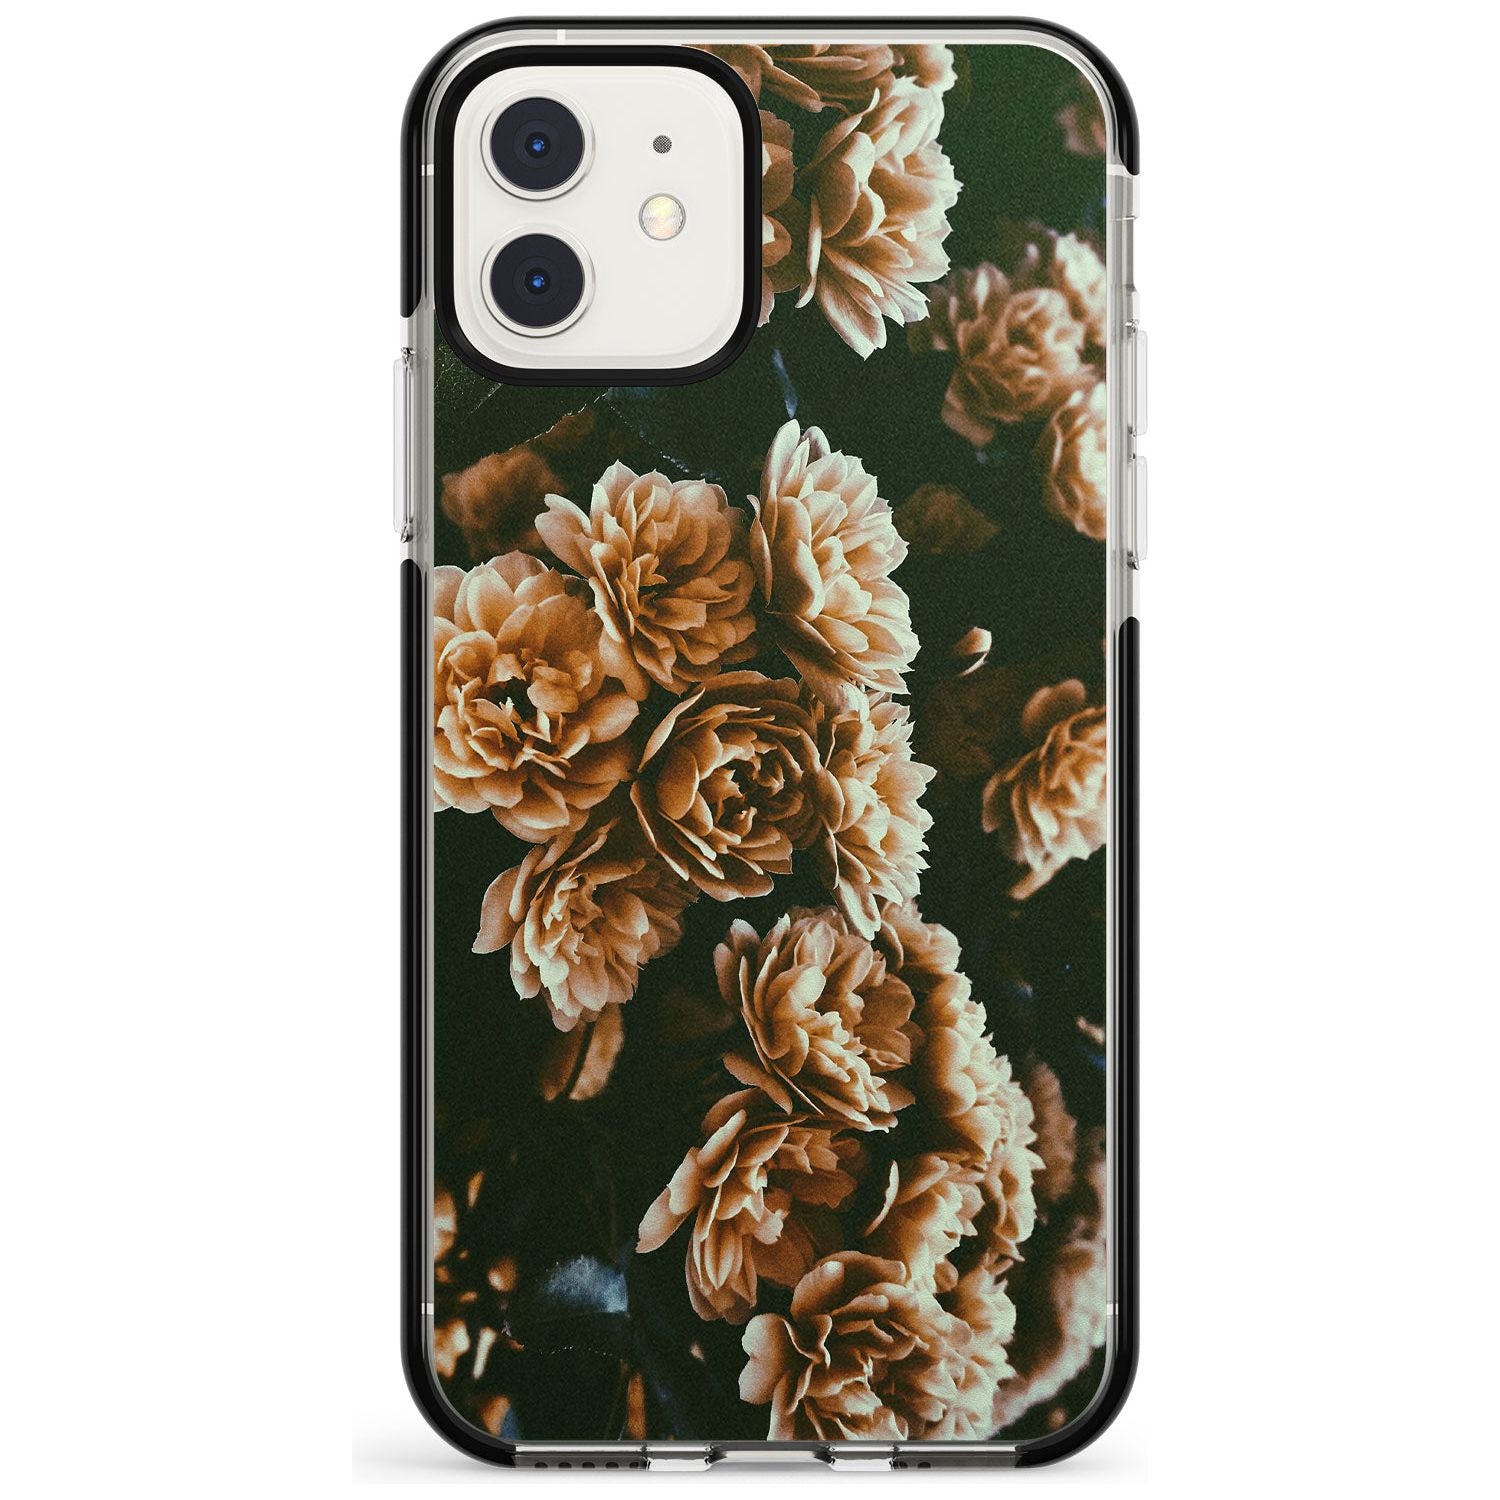 White Peonies - Real Floral Photographs Black Impact Phone Case for iPhone 11